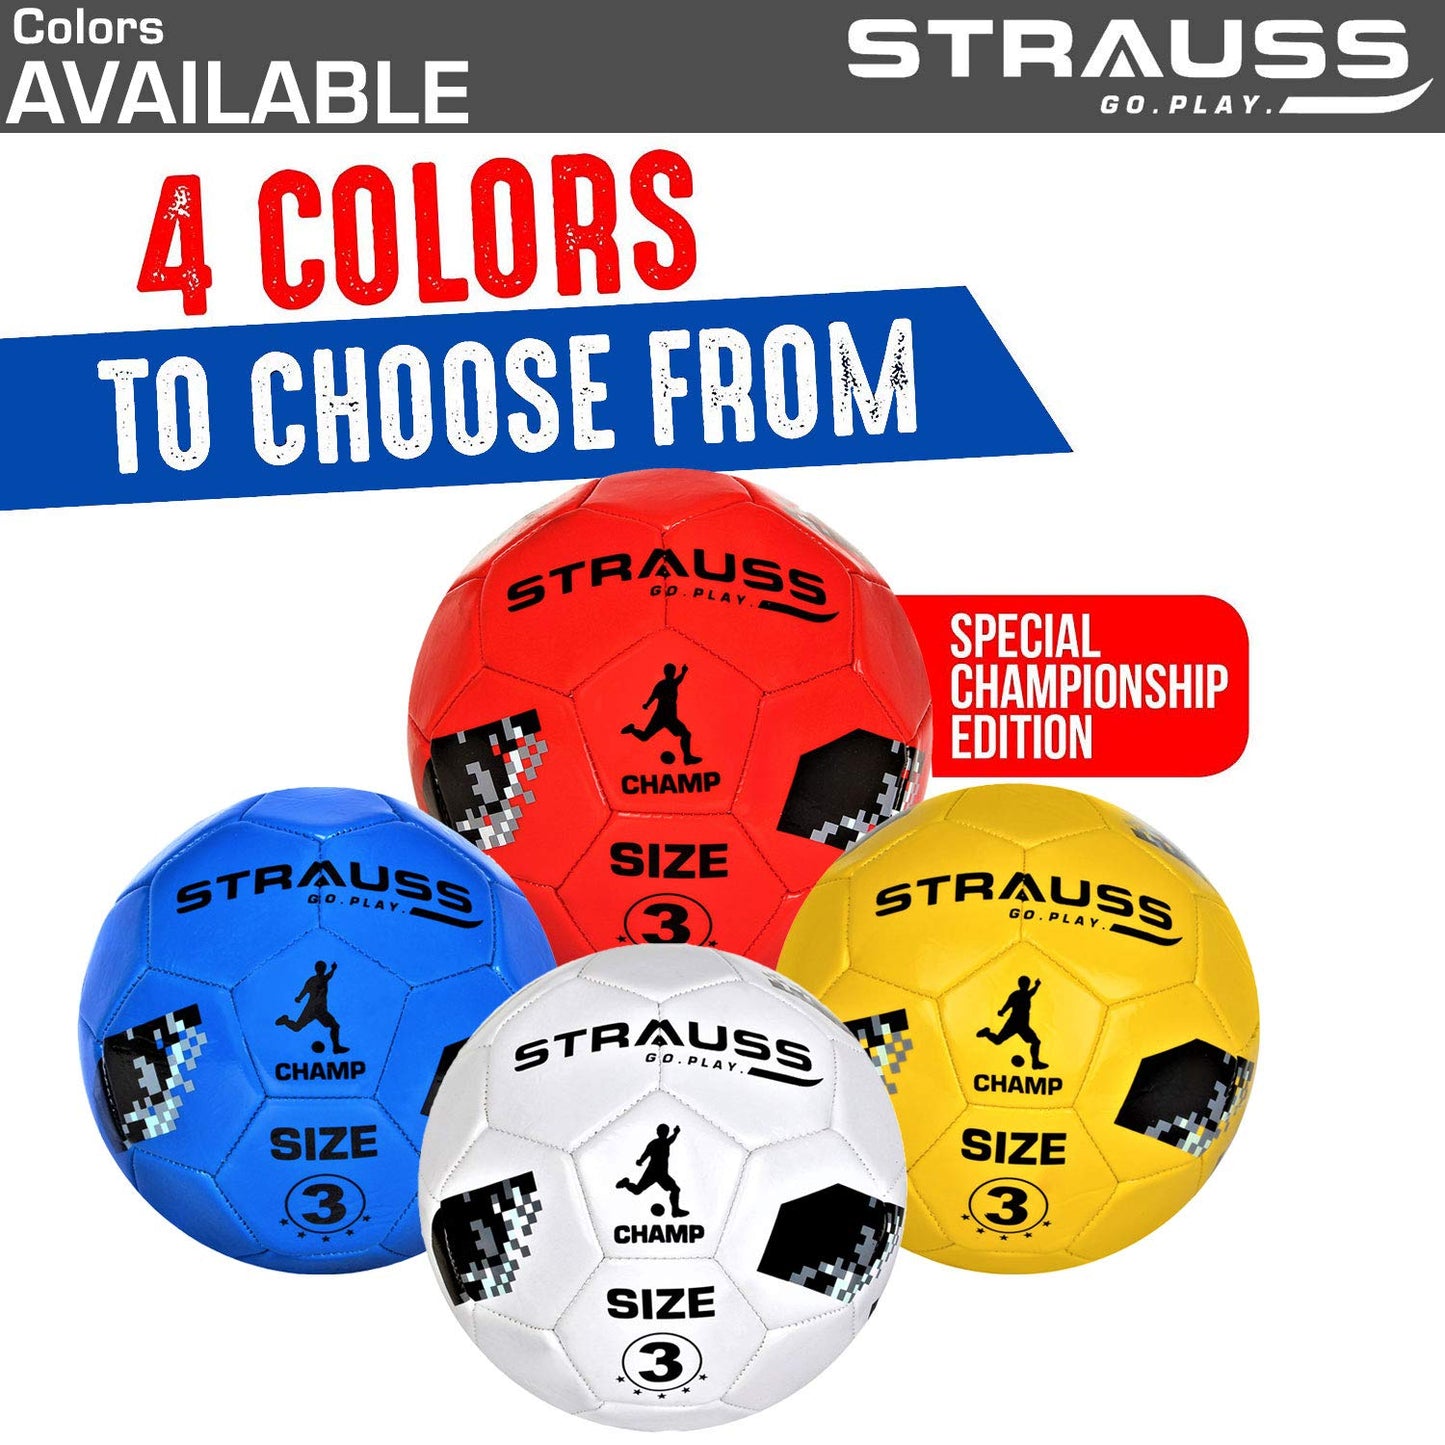 STRAUSS Official Football Size 3 Professional Match Ball for Indoor  Outdoor Games  Training for Kids  Adults  Granular Texture with High-Performance Grained Surface Blue